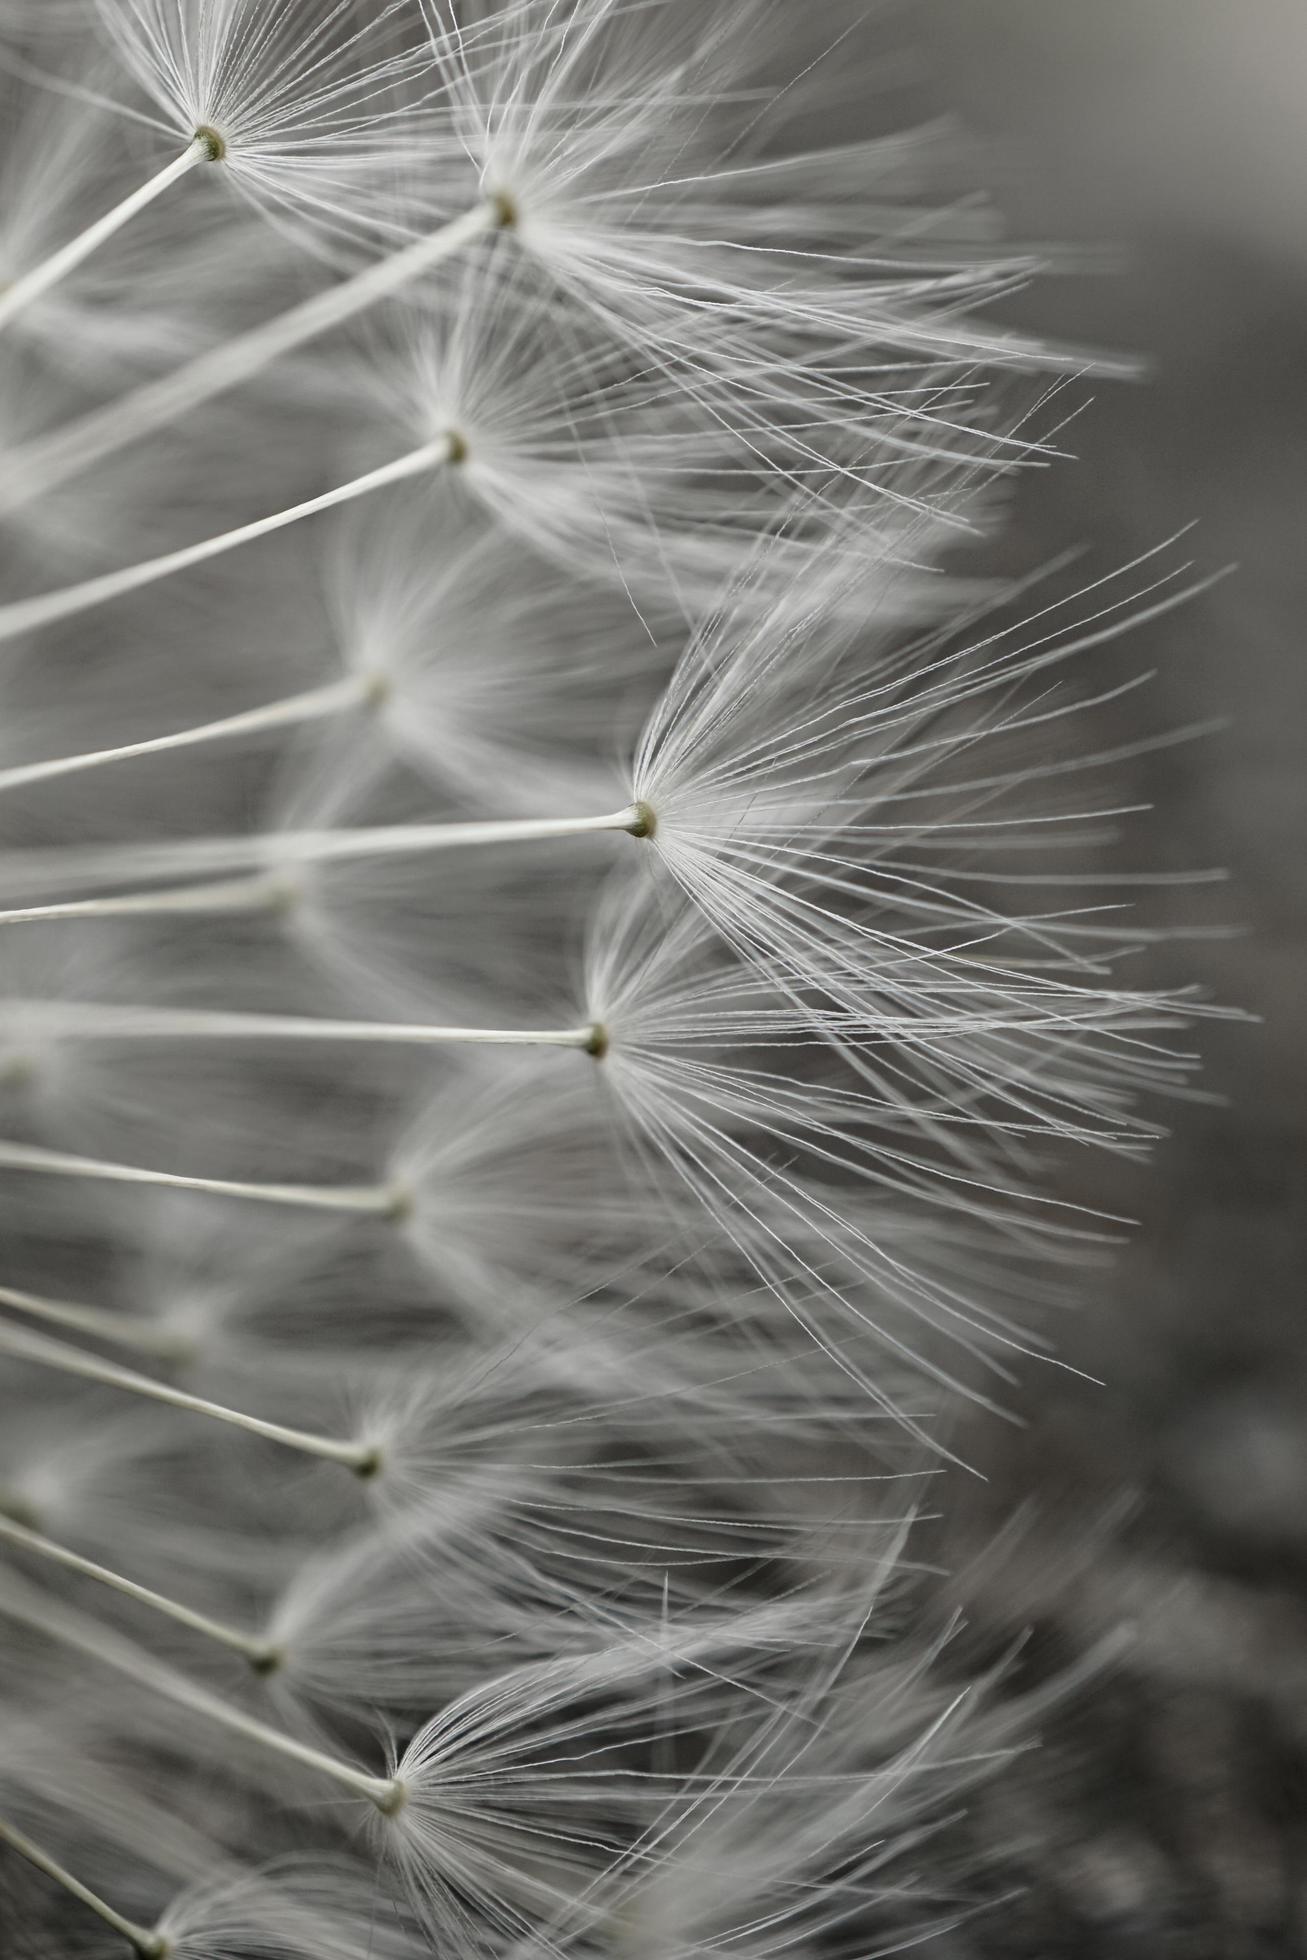 A close up of a dandelion clock, showing the seeds. - Dandelions